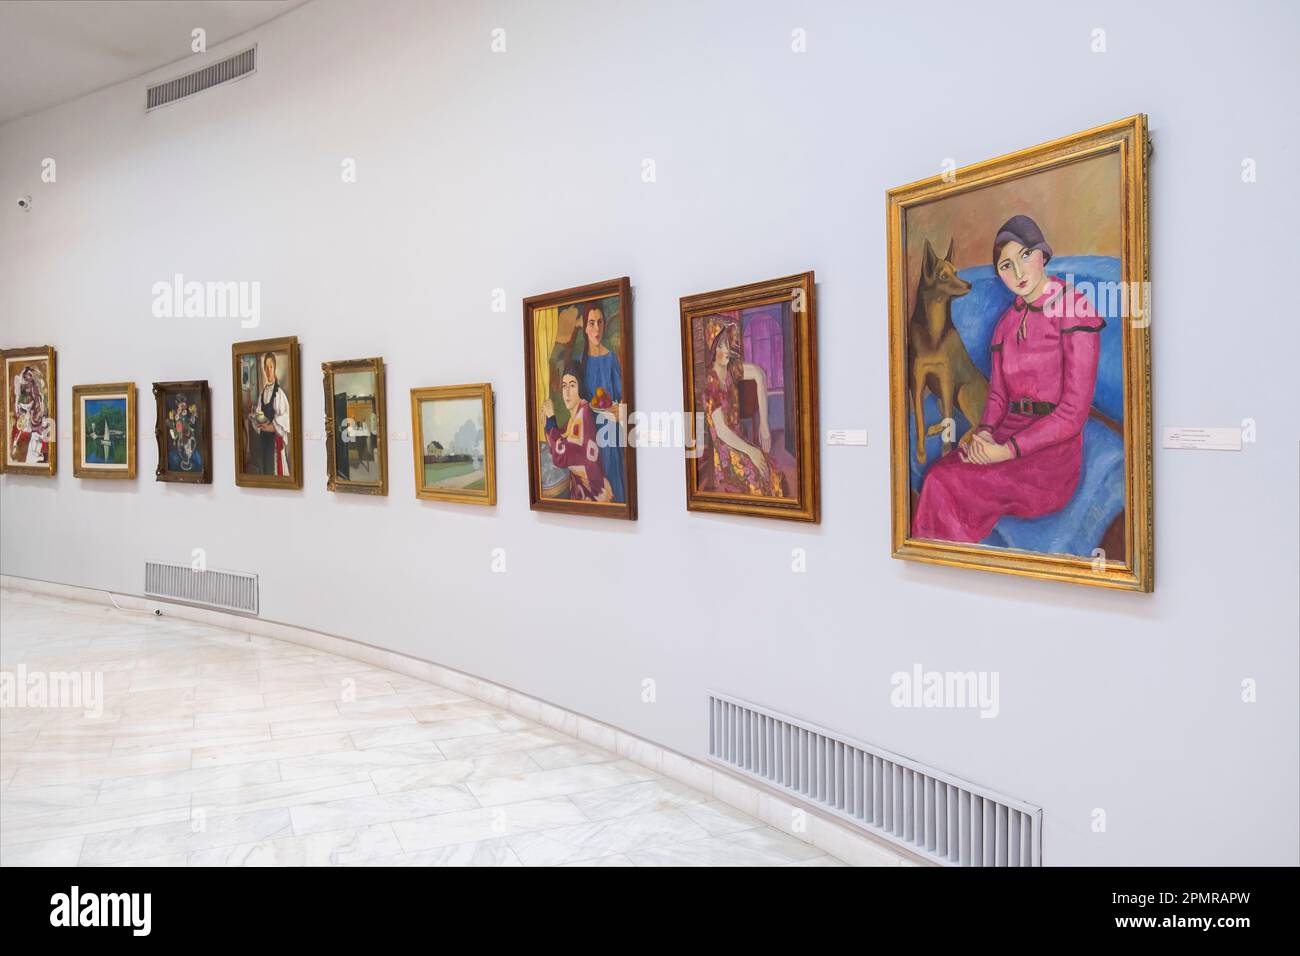 Interior of the National Museum Art Bucharest located in the former Royal Palace of Bucharest, Romania. Gallery of Romanian art. Stock Photo